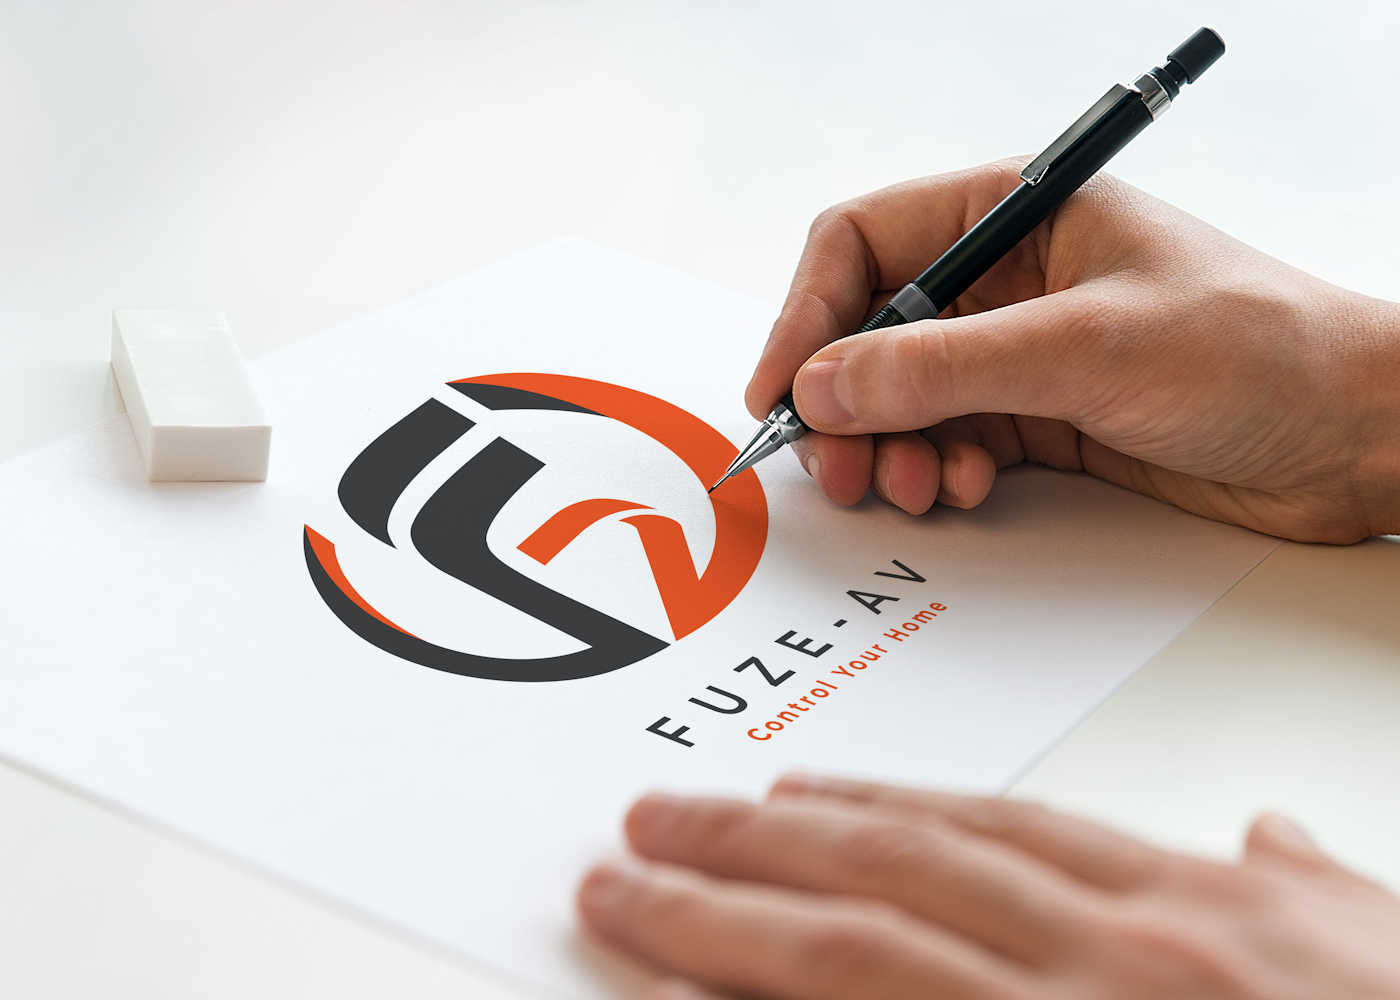 Logo Design Touch Up